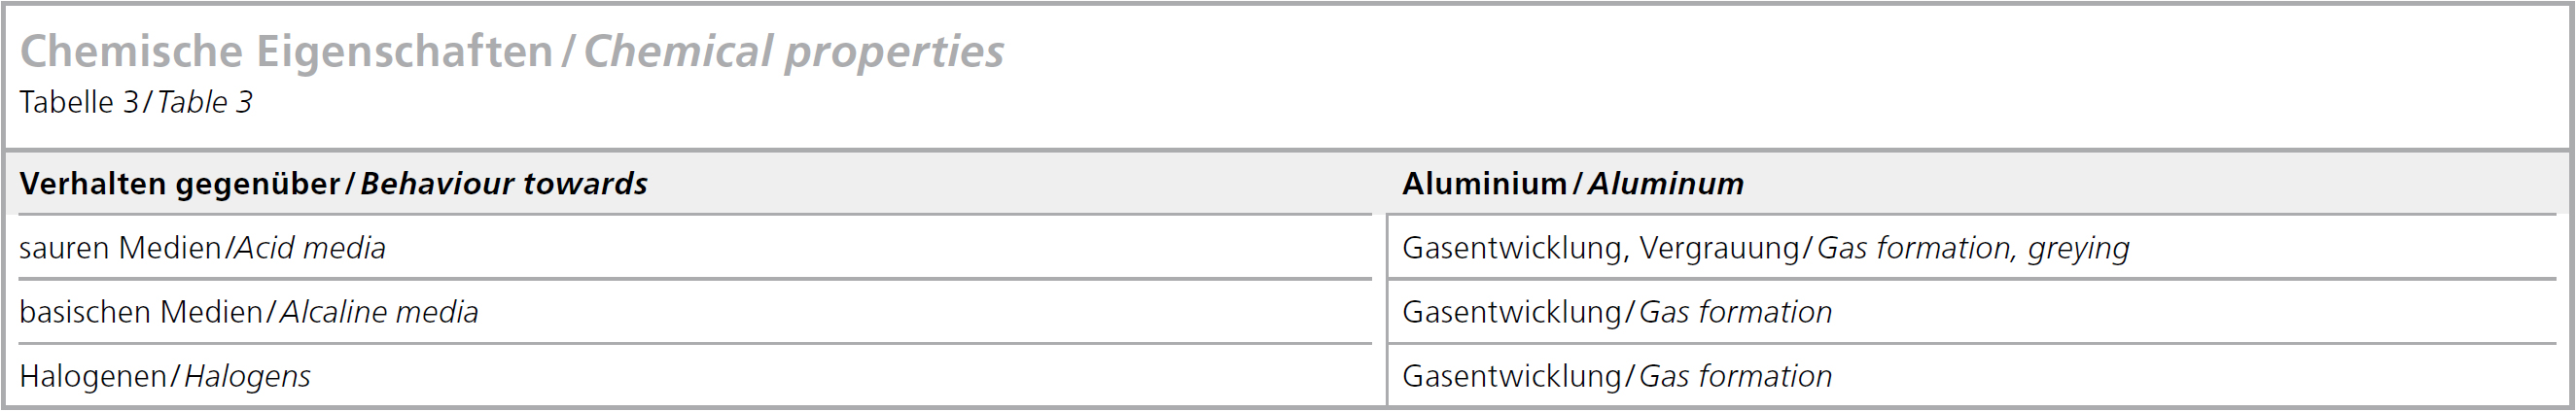 Table showing the chemical properties of aluminum paste.